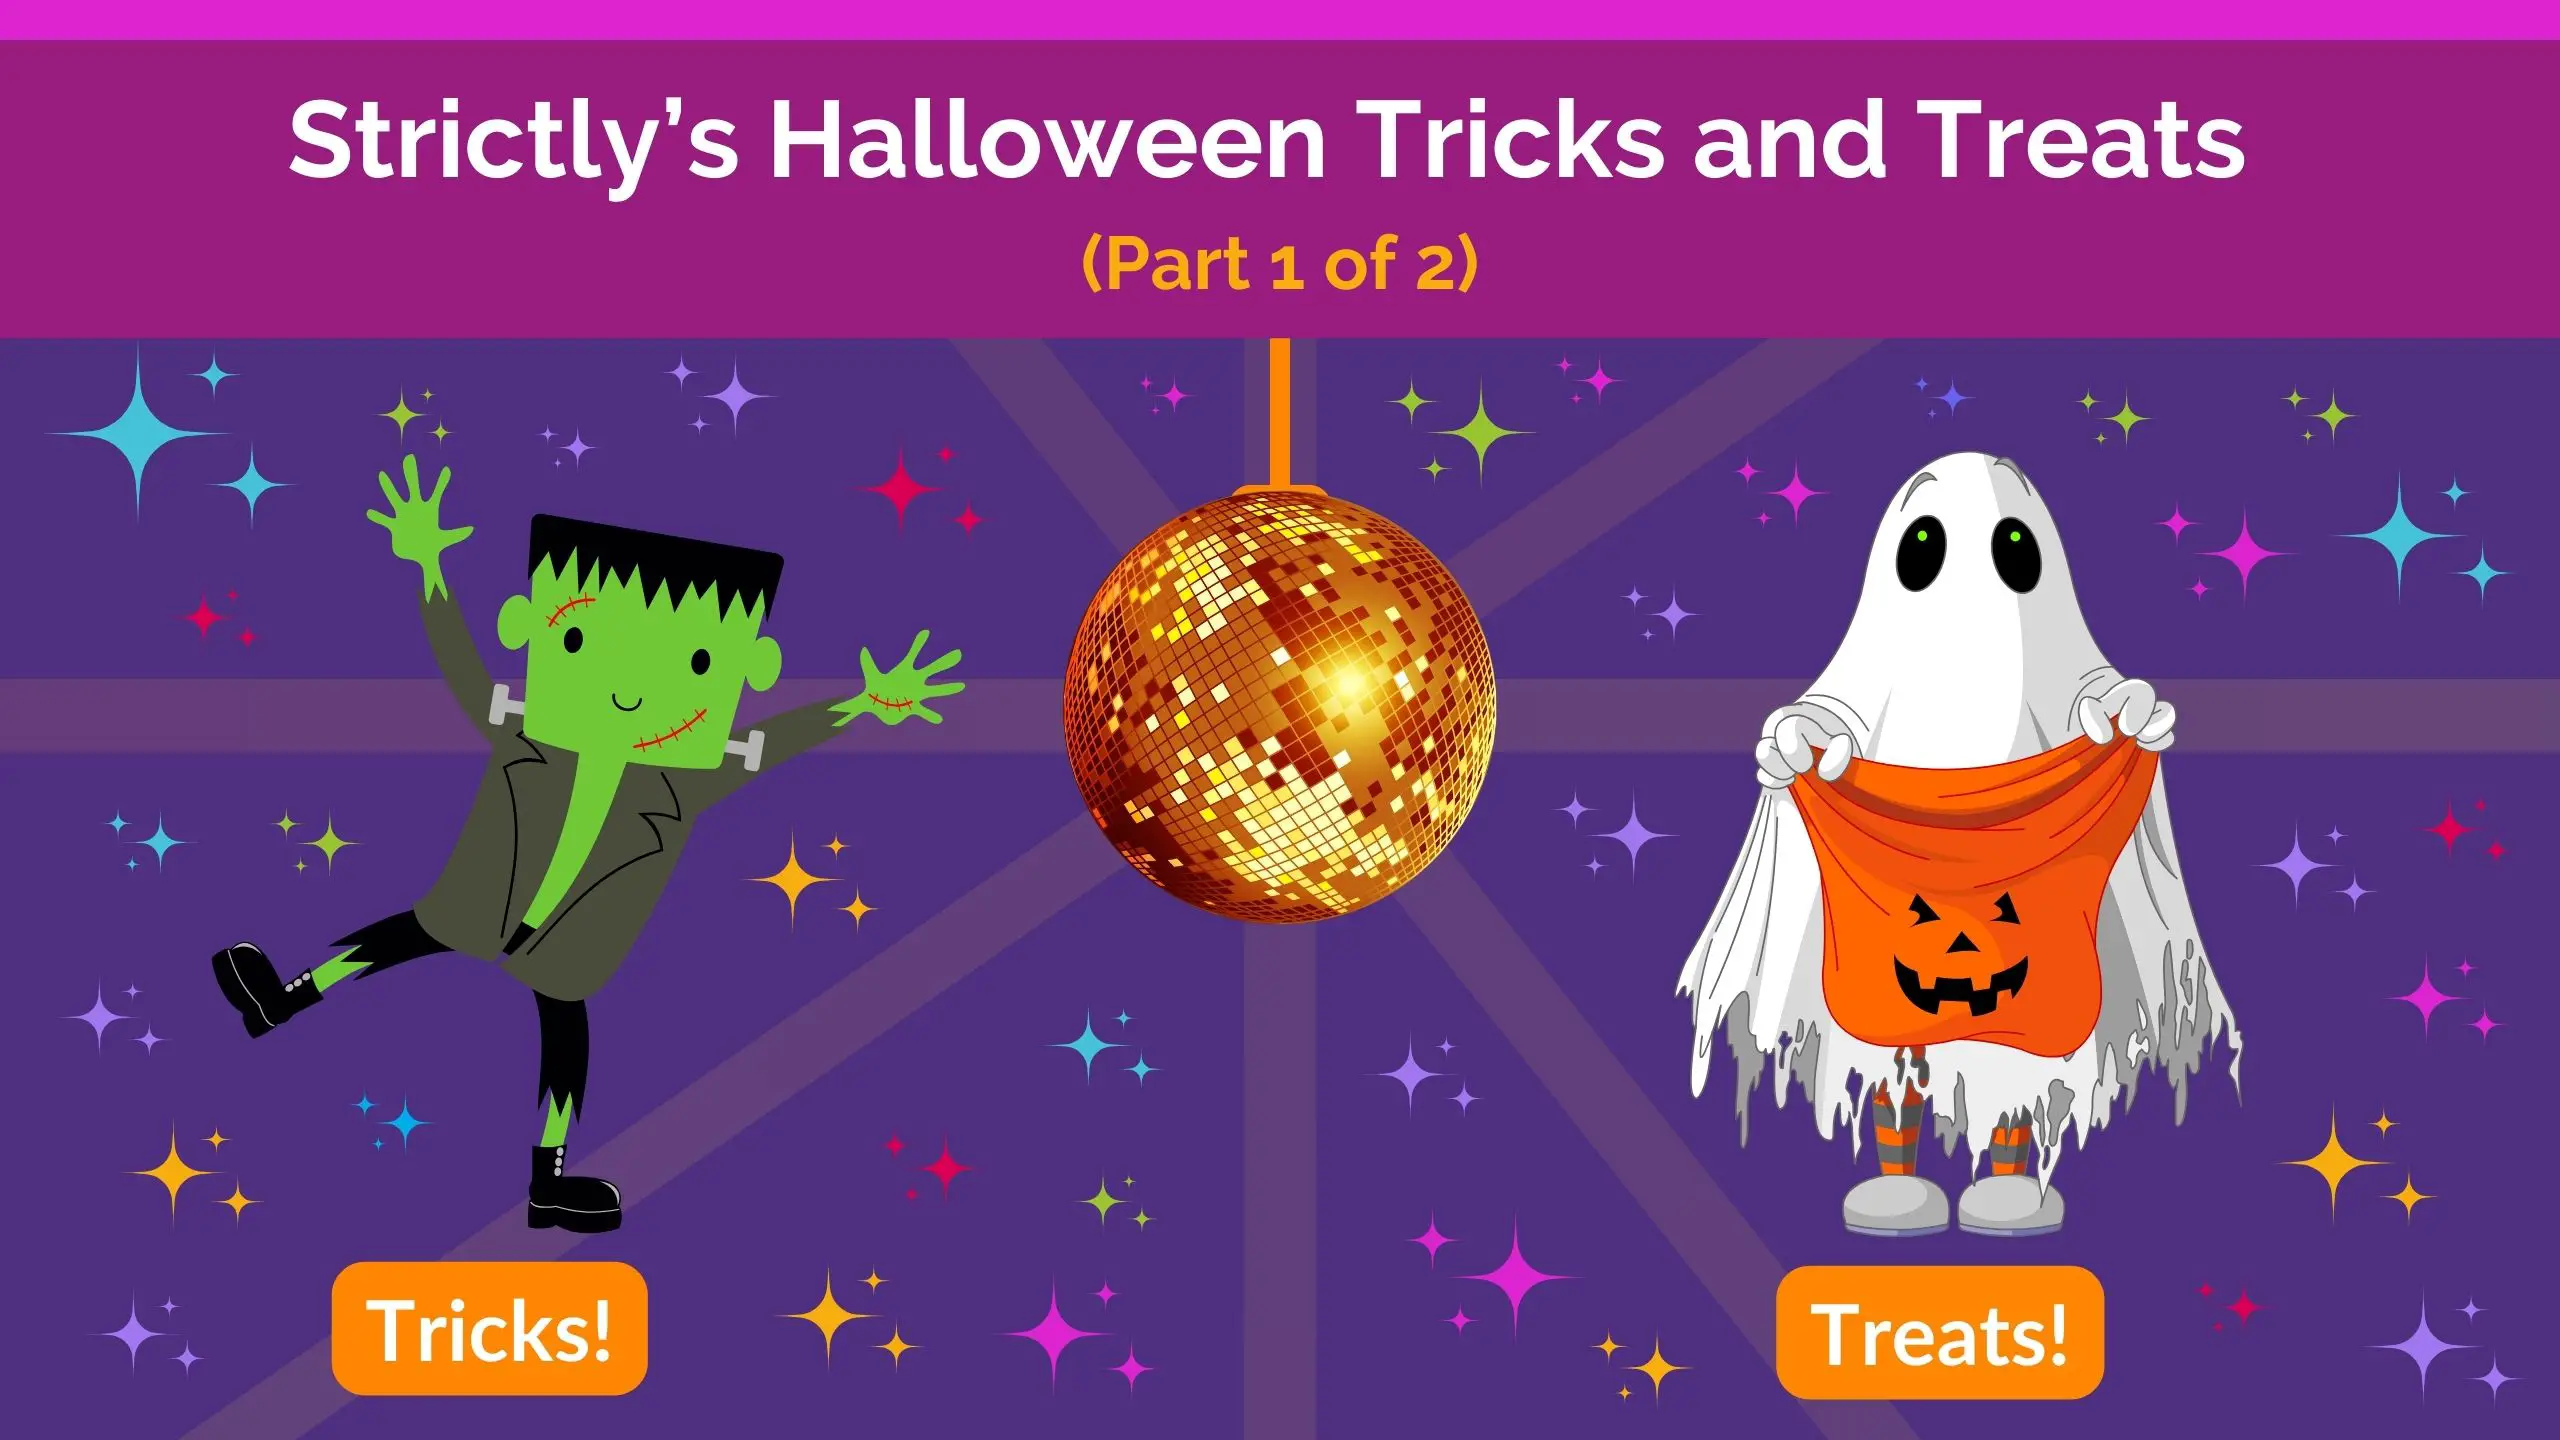 Strictly’s Halloween Tricks and Treats (Part 1 of 2)